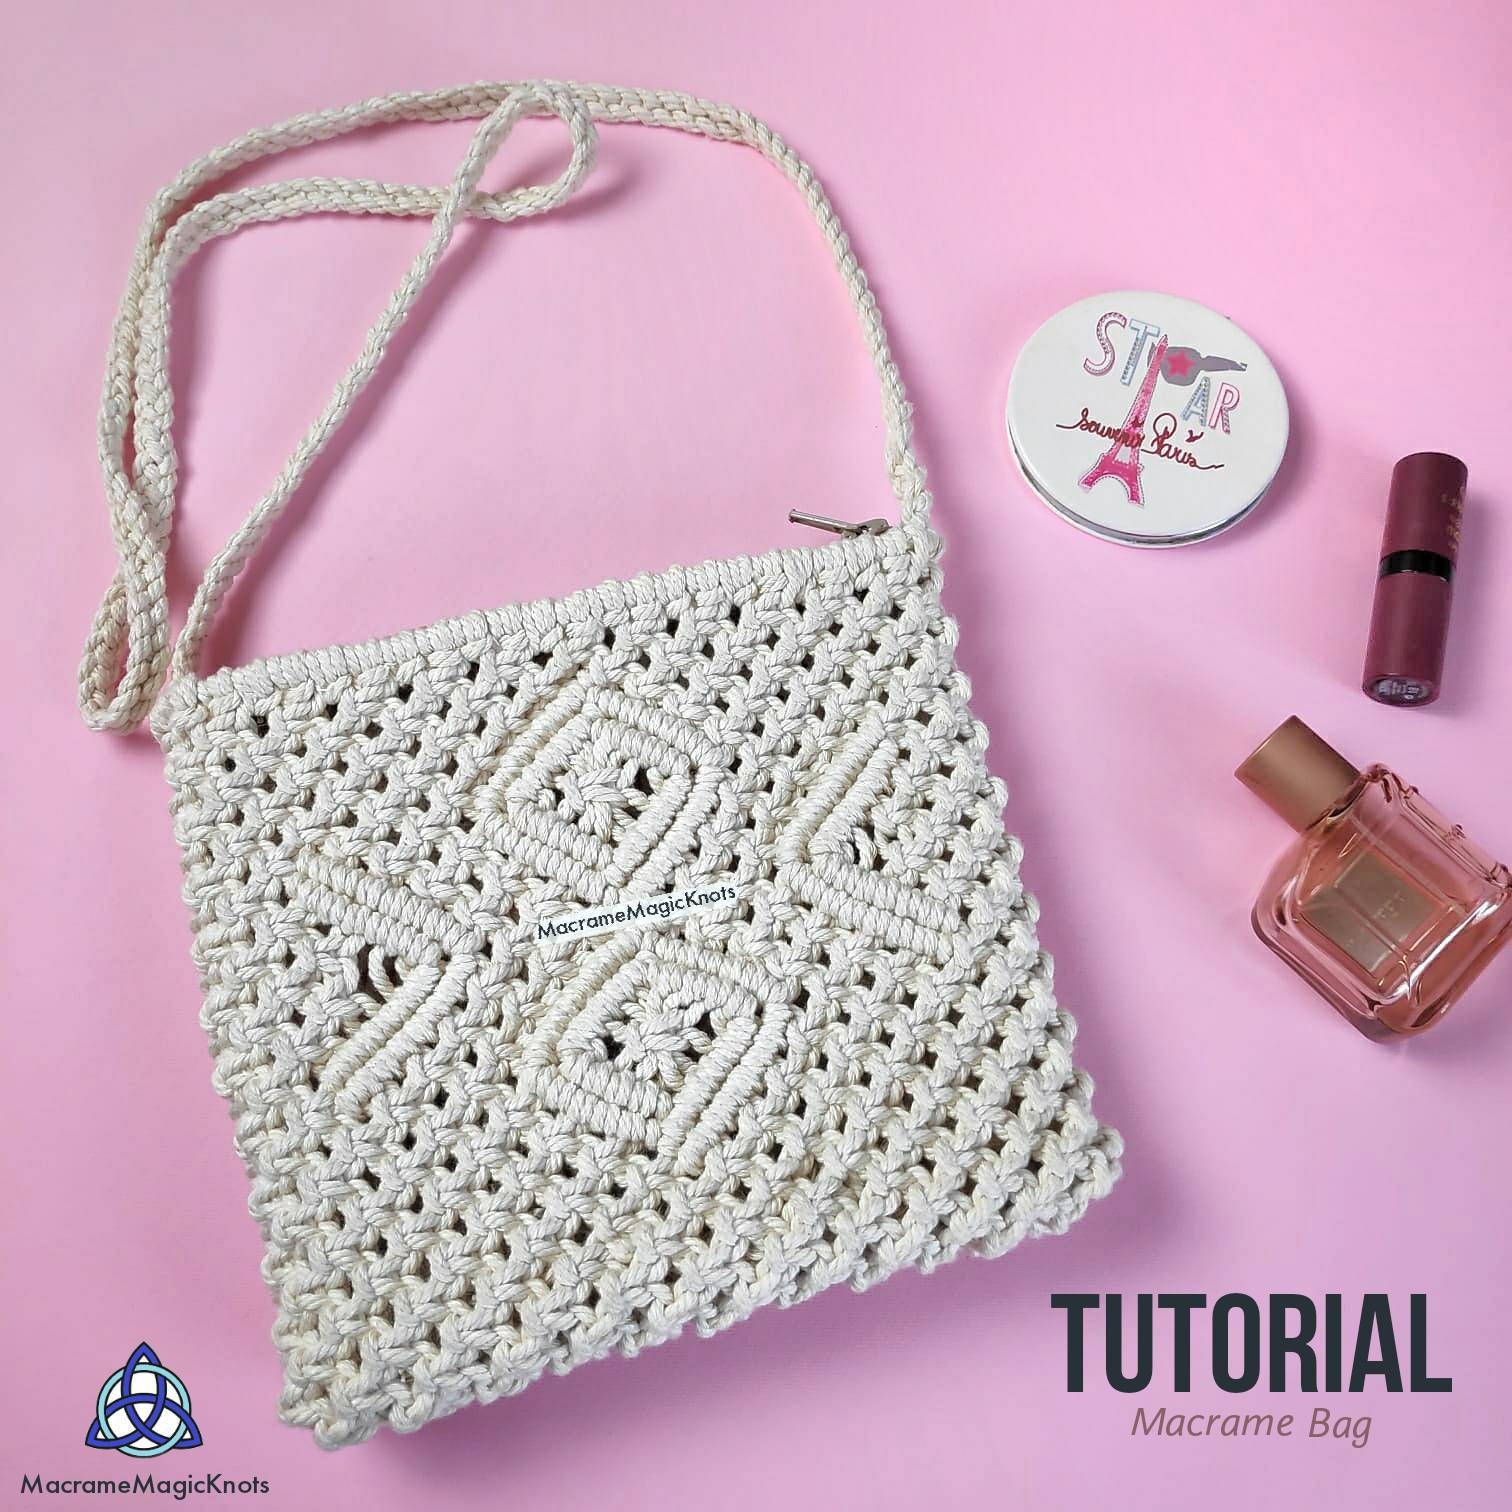 How to Make a Macrame Bag – Knots + Supplies + DIY Patterns | Macrame for  Beginners